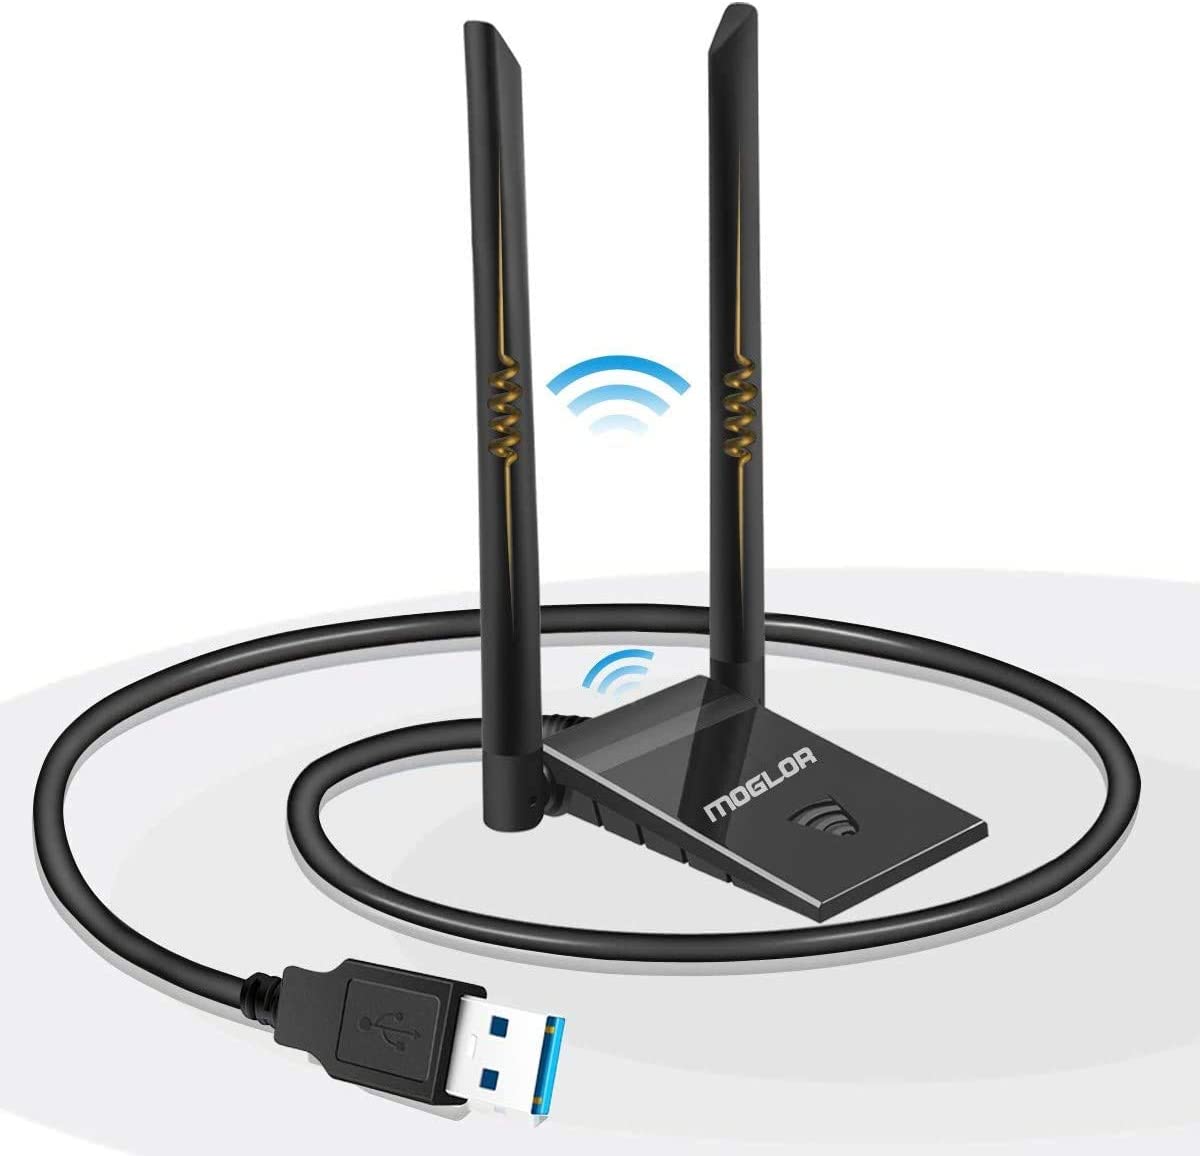 Moglor WLAN Stick Adapter USB WiFi Antenna PC Dongle 5GHz/867Mbps 2.4 GHz/300 Mbps Dual Band 5dBi Network